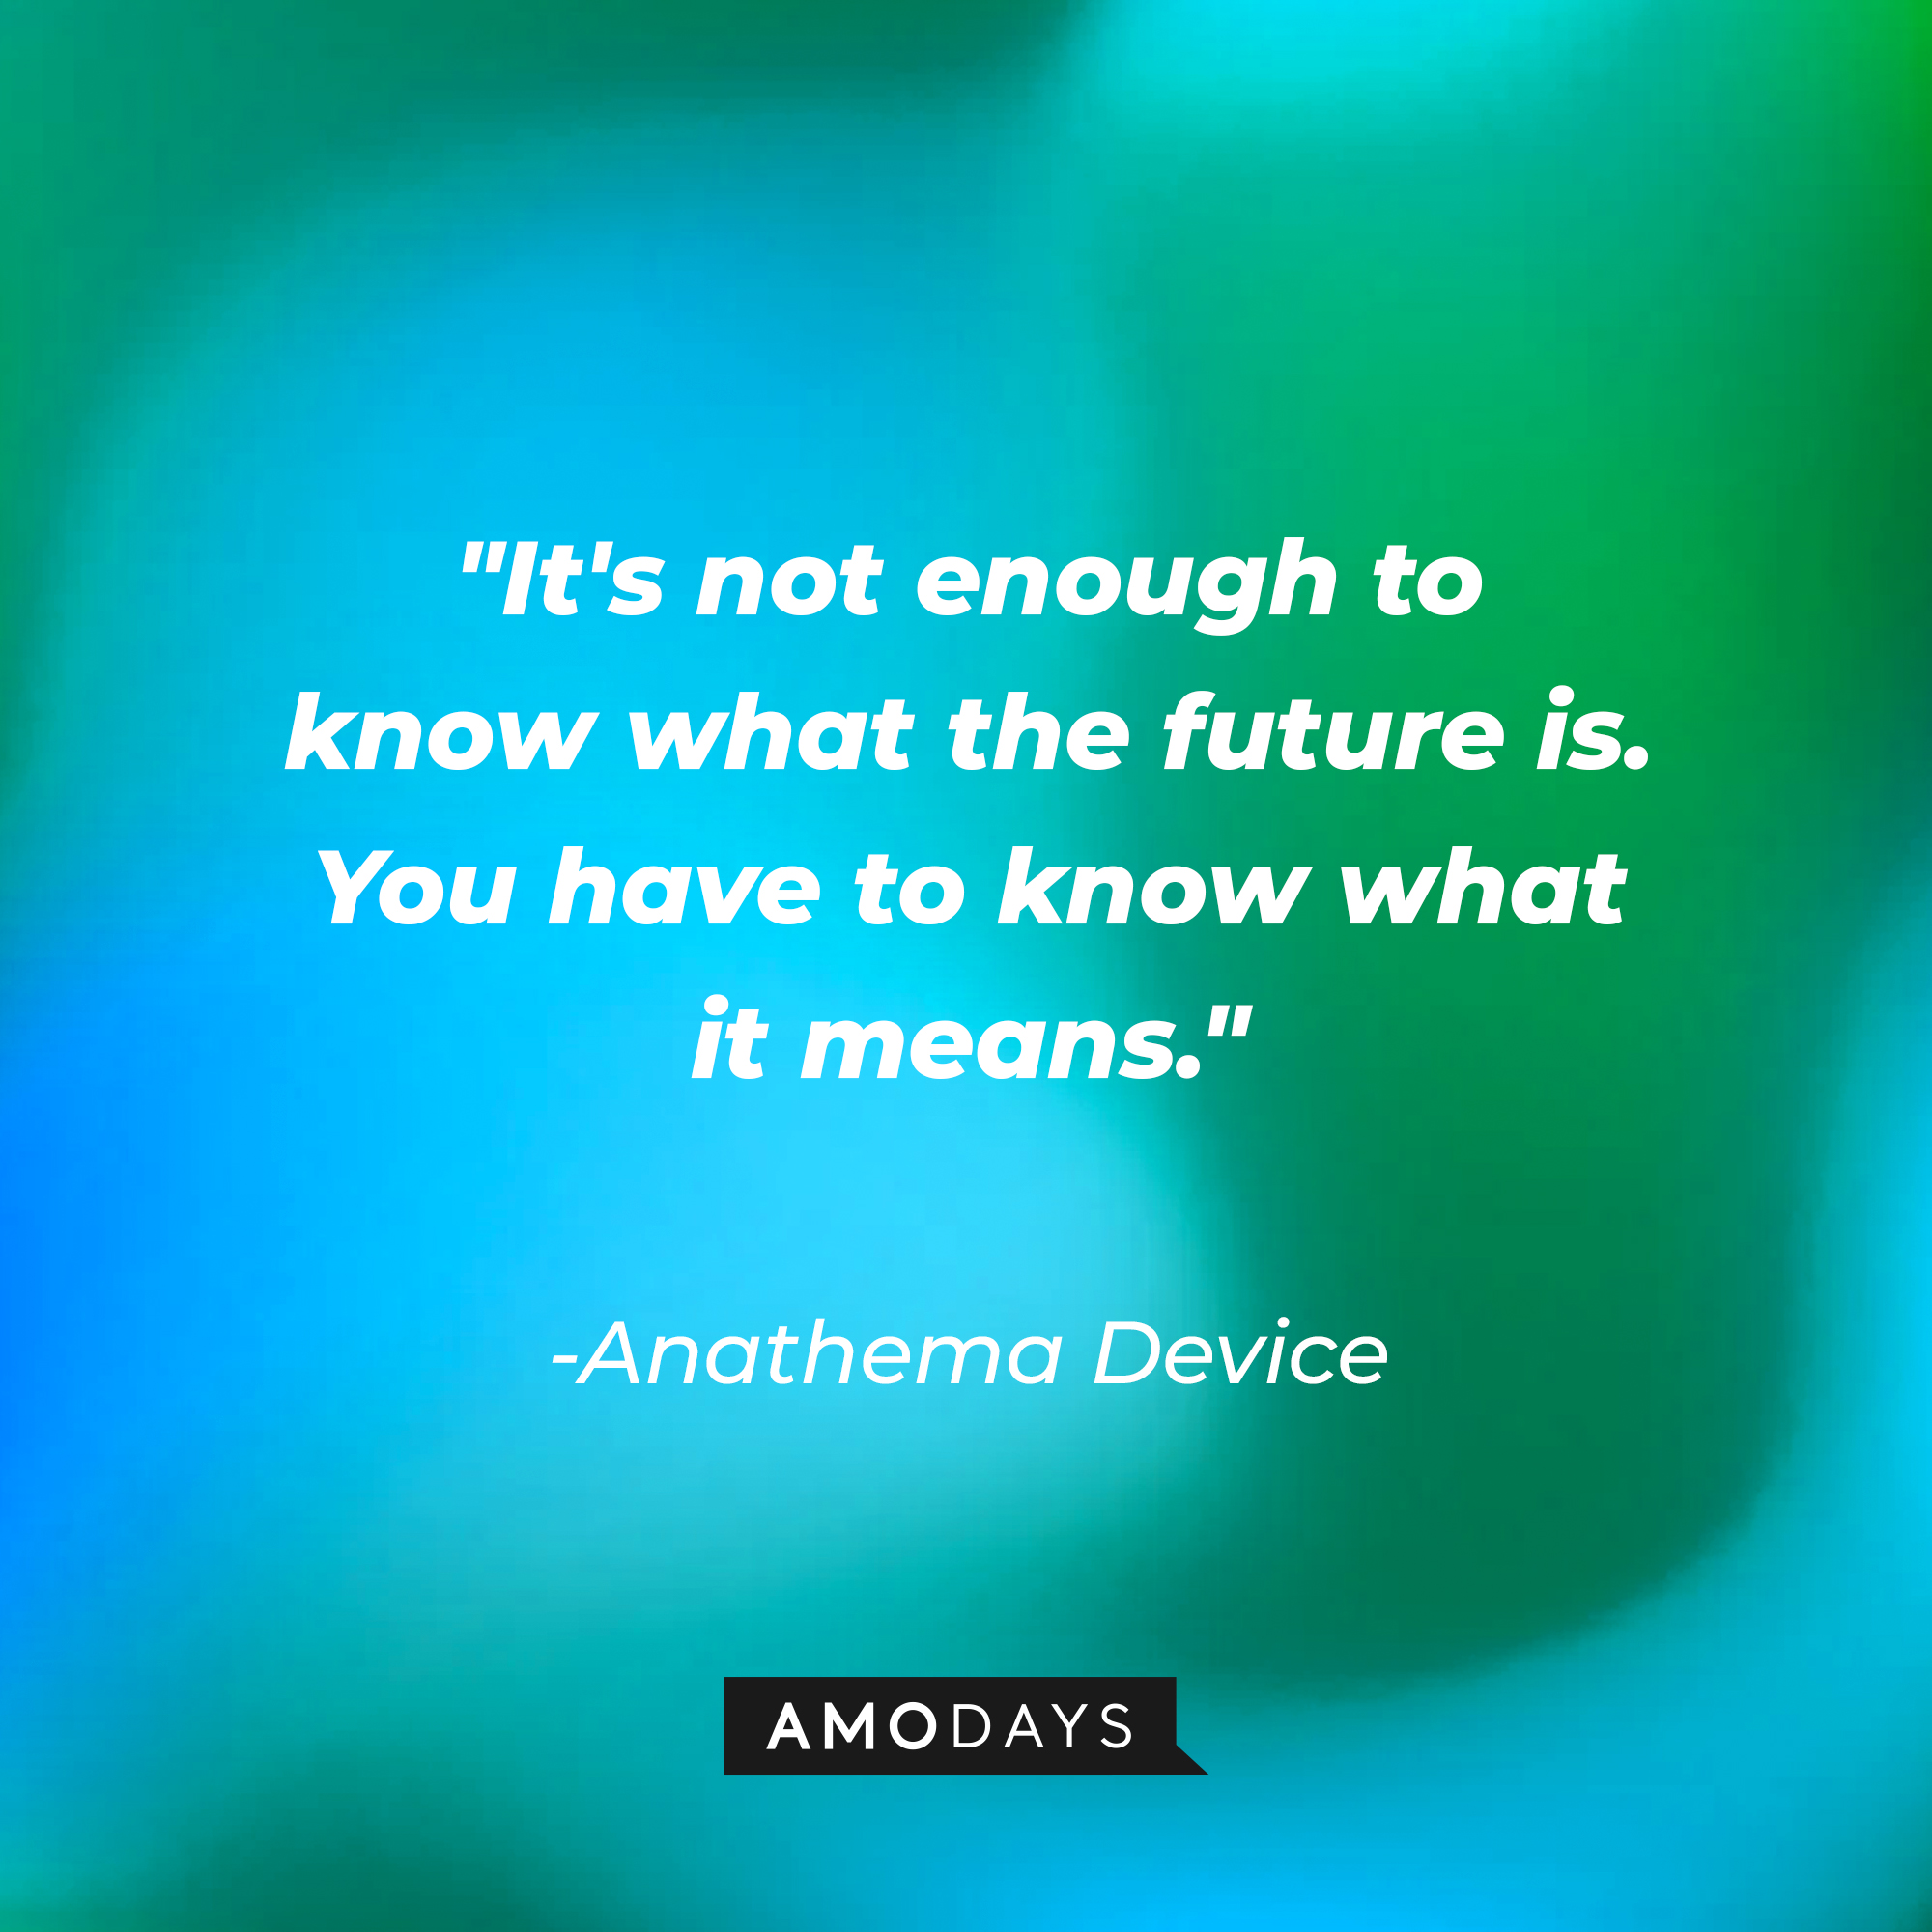 Anathema Device's quote: "It's not enough to know what the future \\\\u200bis. You have to know what it means." | Source: AmoDays